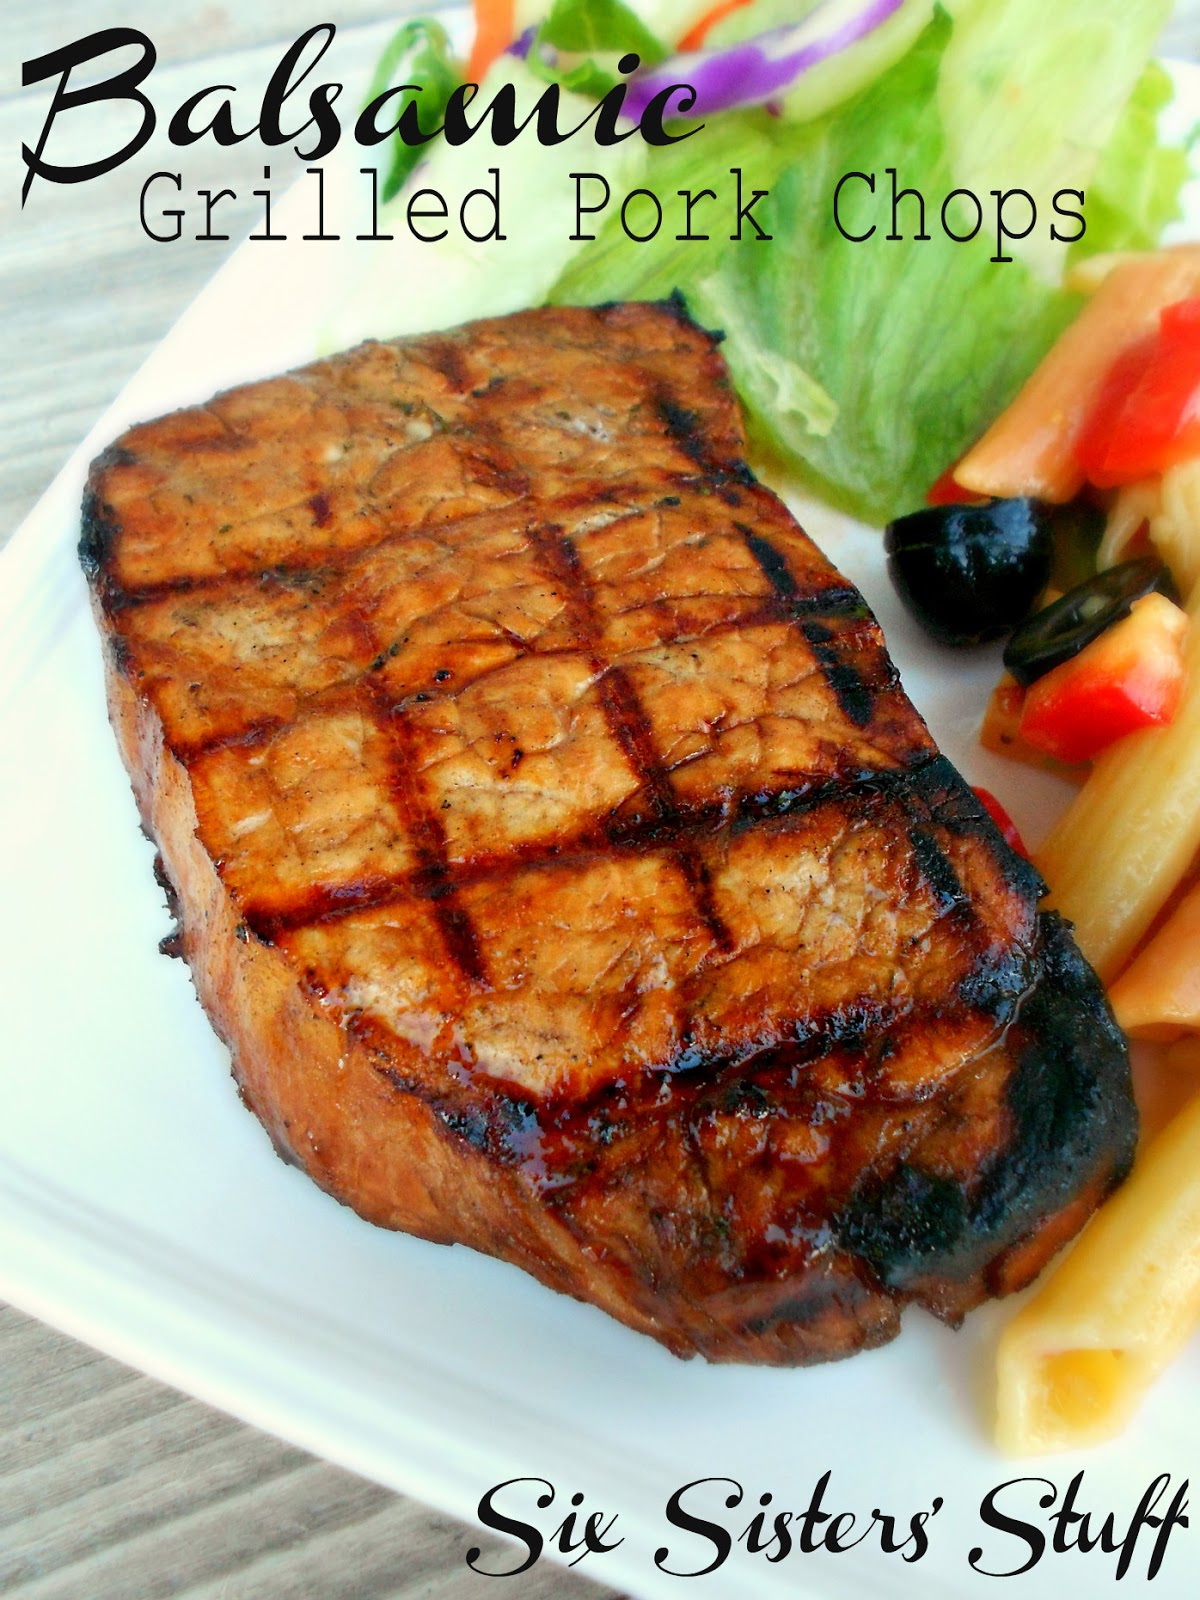 Balsamic Grilled Pork Chops | 25+ gluten and dairy free recipes